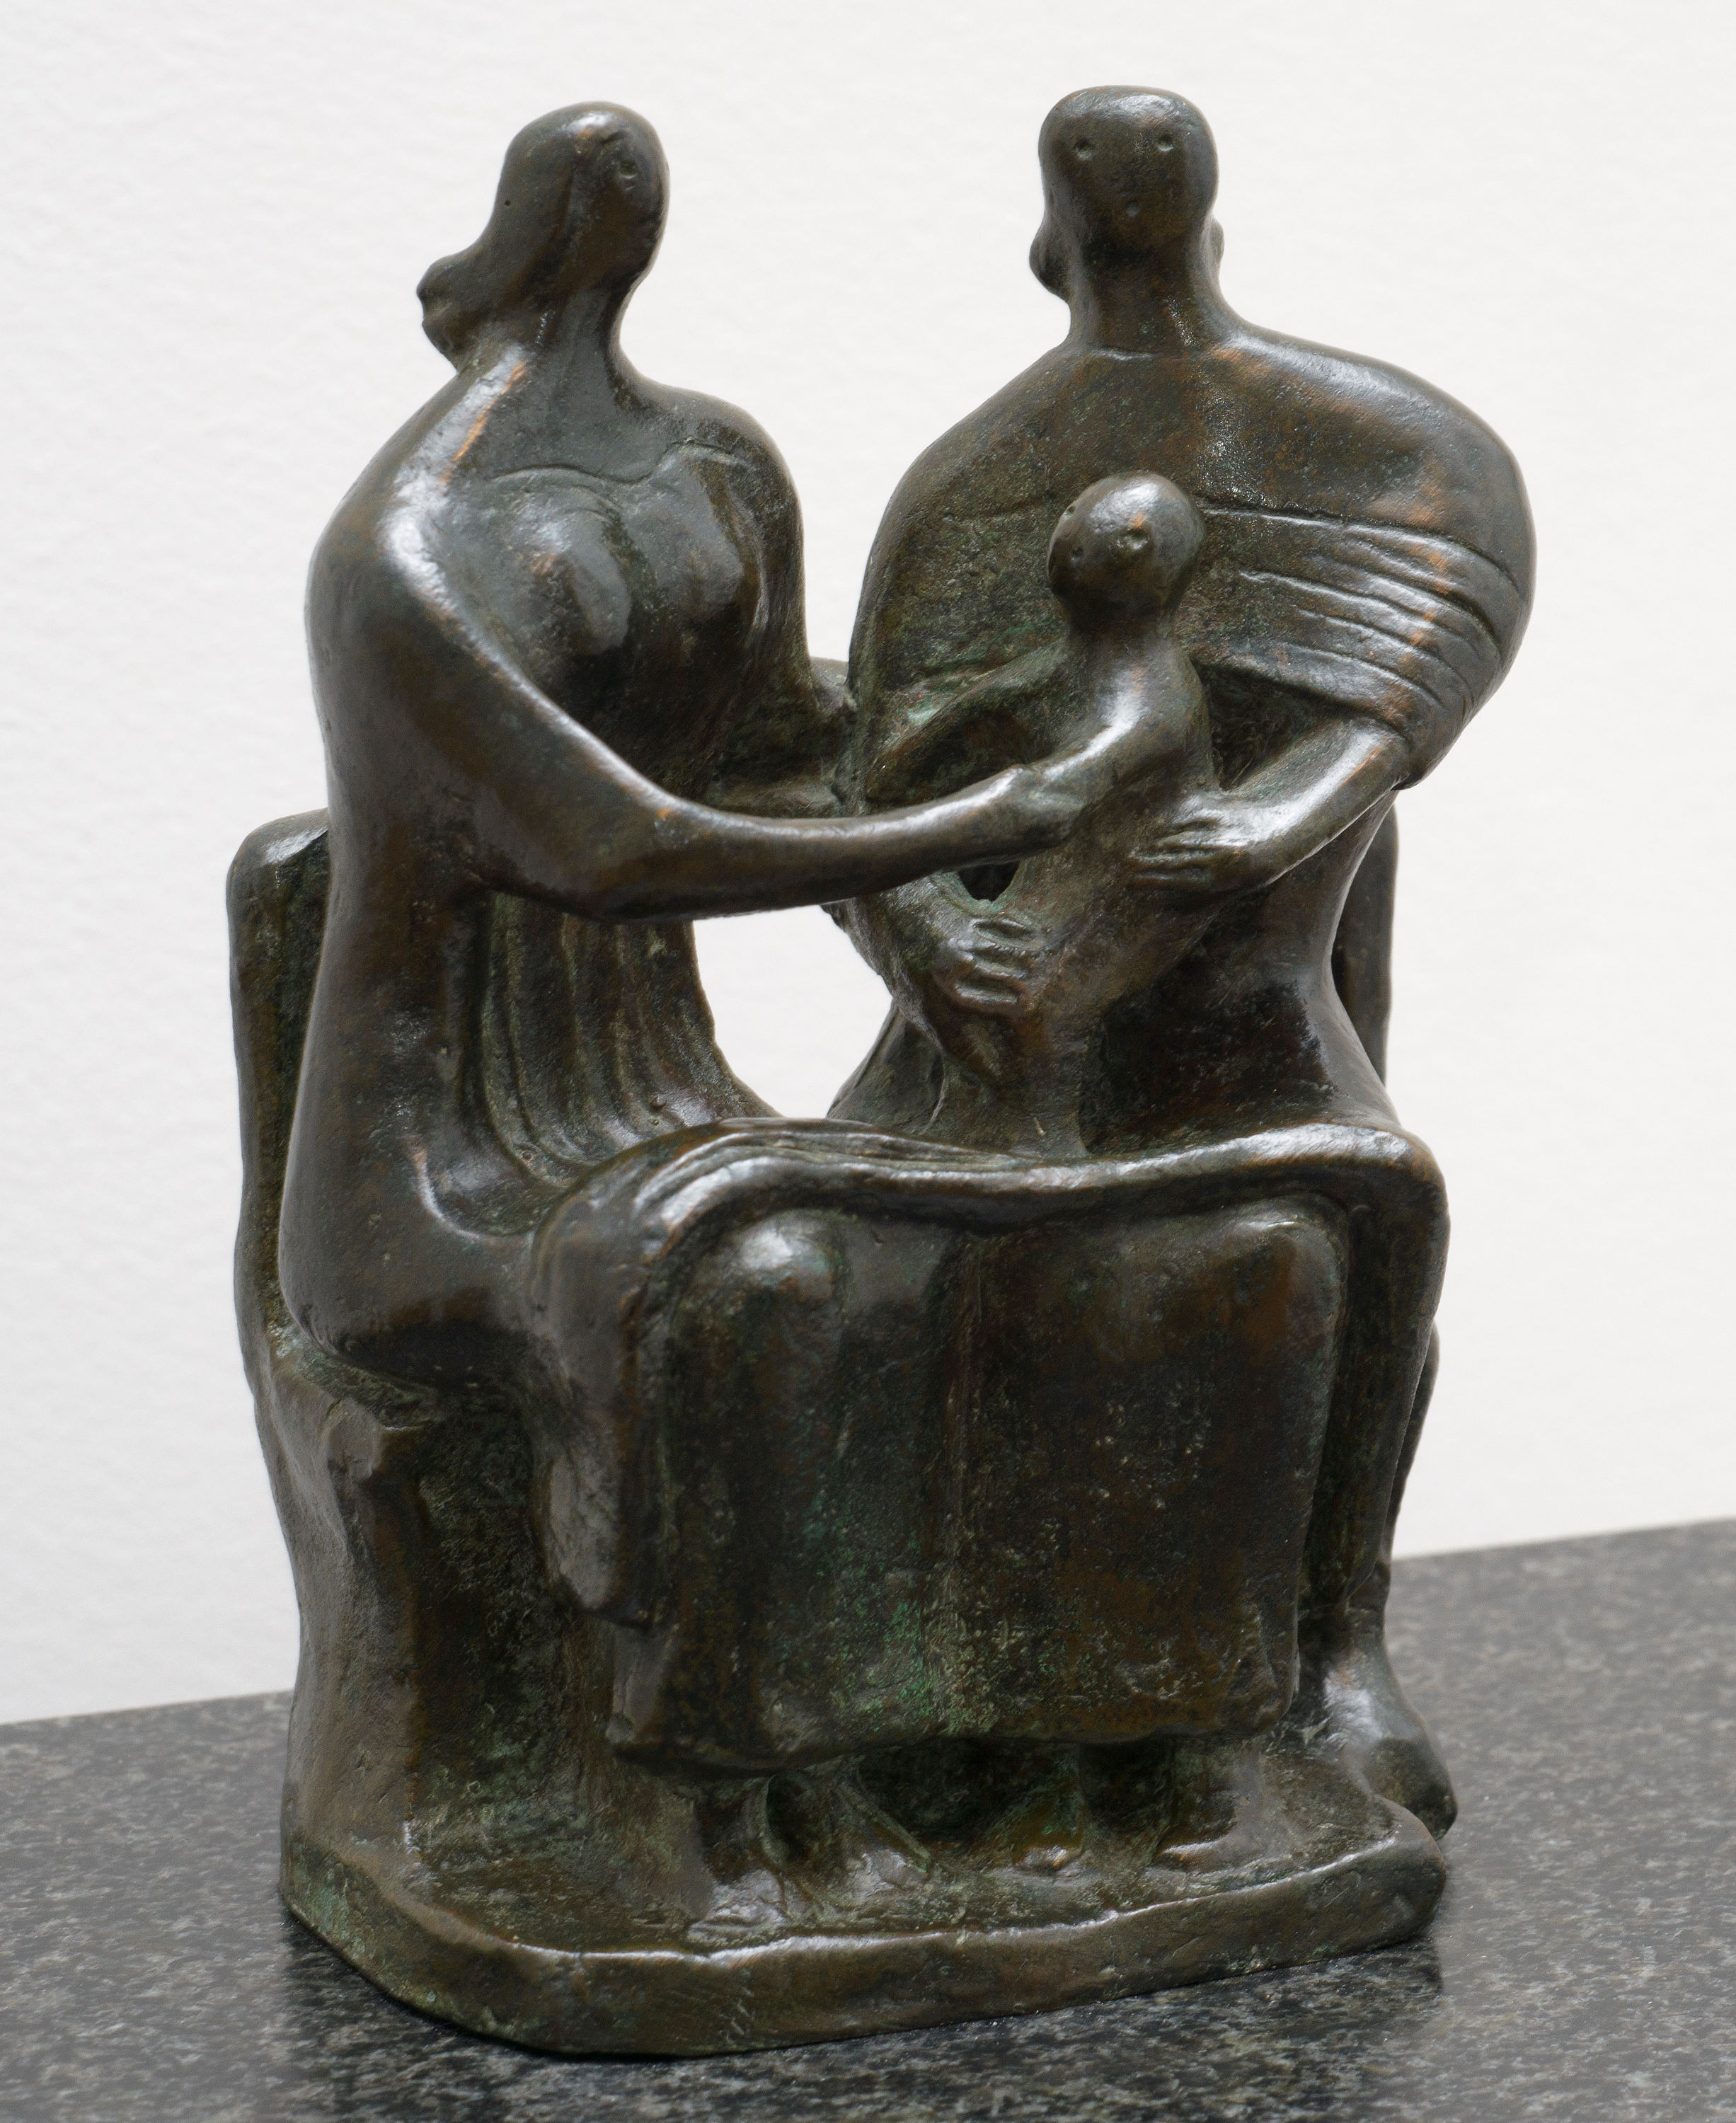 <p><strong>Henry Moore</strong><br />
<em>Study for a family group</em> 1945<br />
Mackelvie Trust Collection, Auckland Art Gallery Toi o Tāmaki, purchased 1948</p>